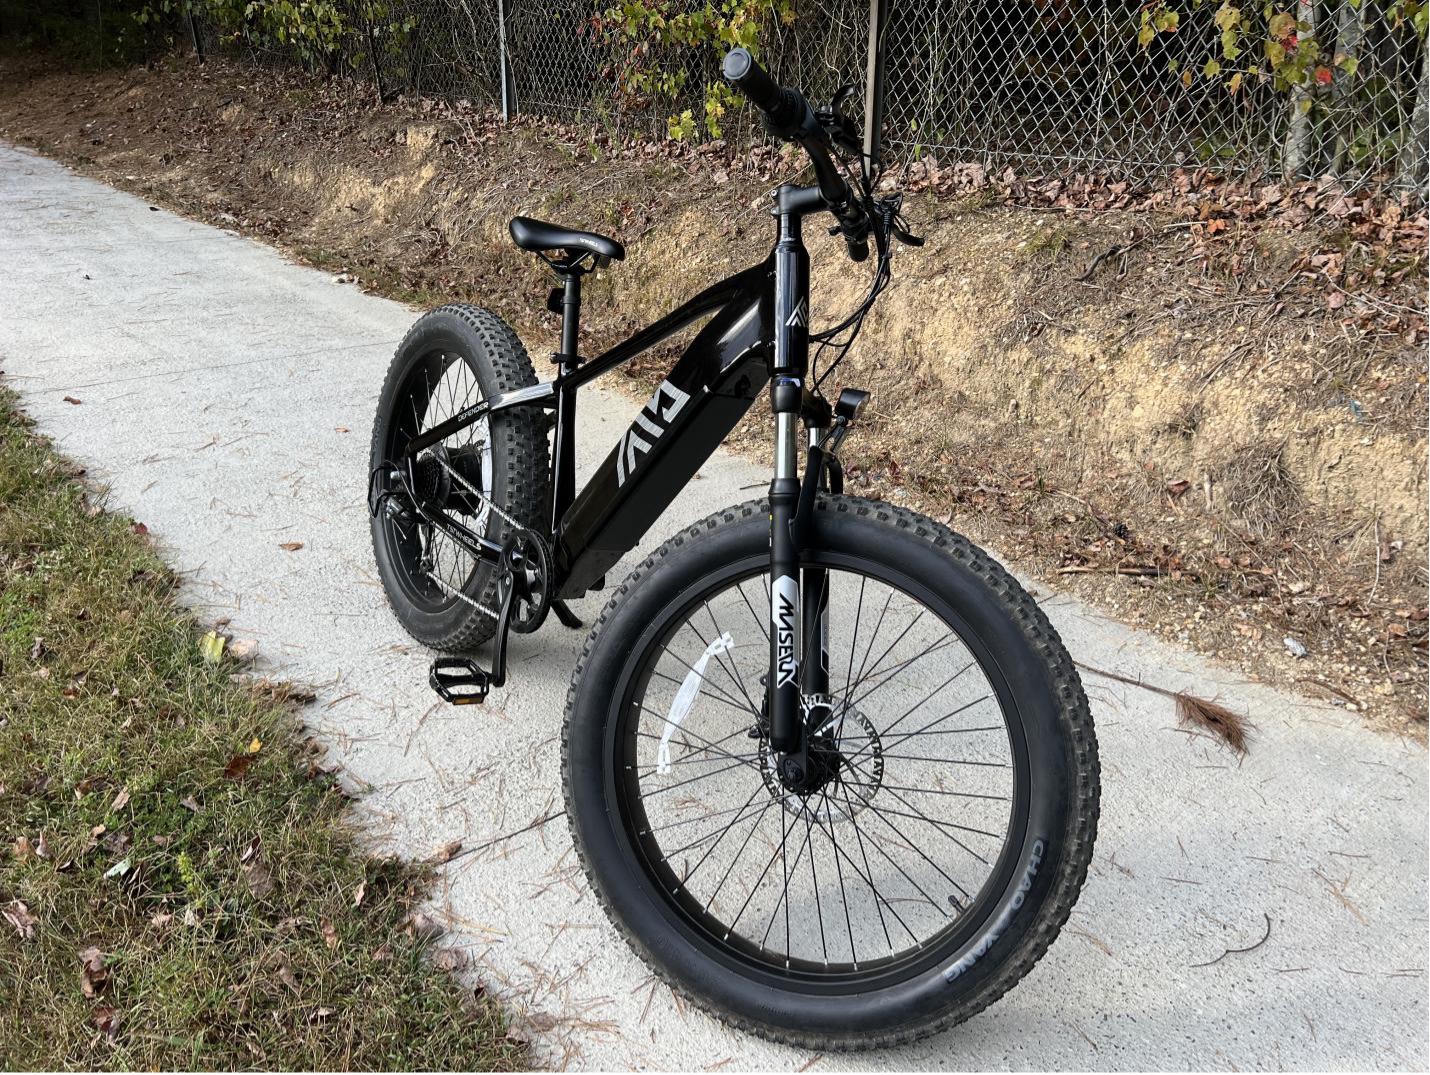 TST Defender Electric Bike Review- Style, Performance and Value Combined